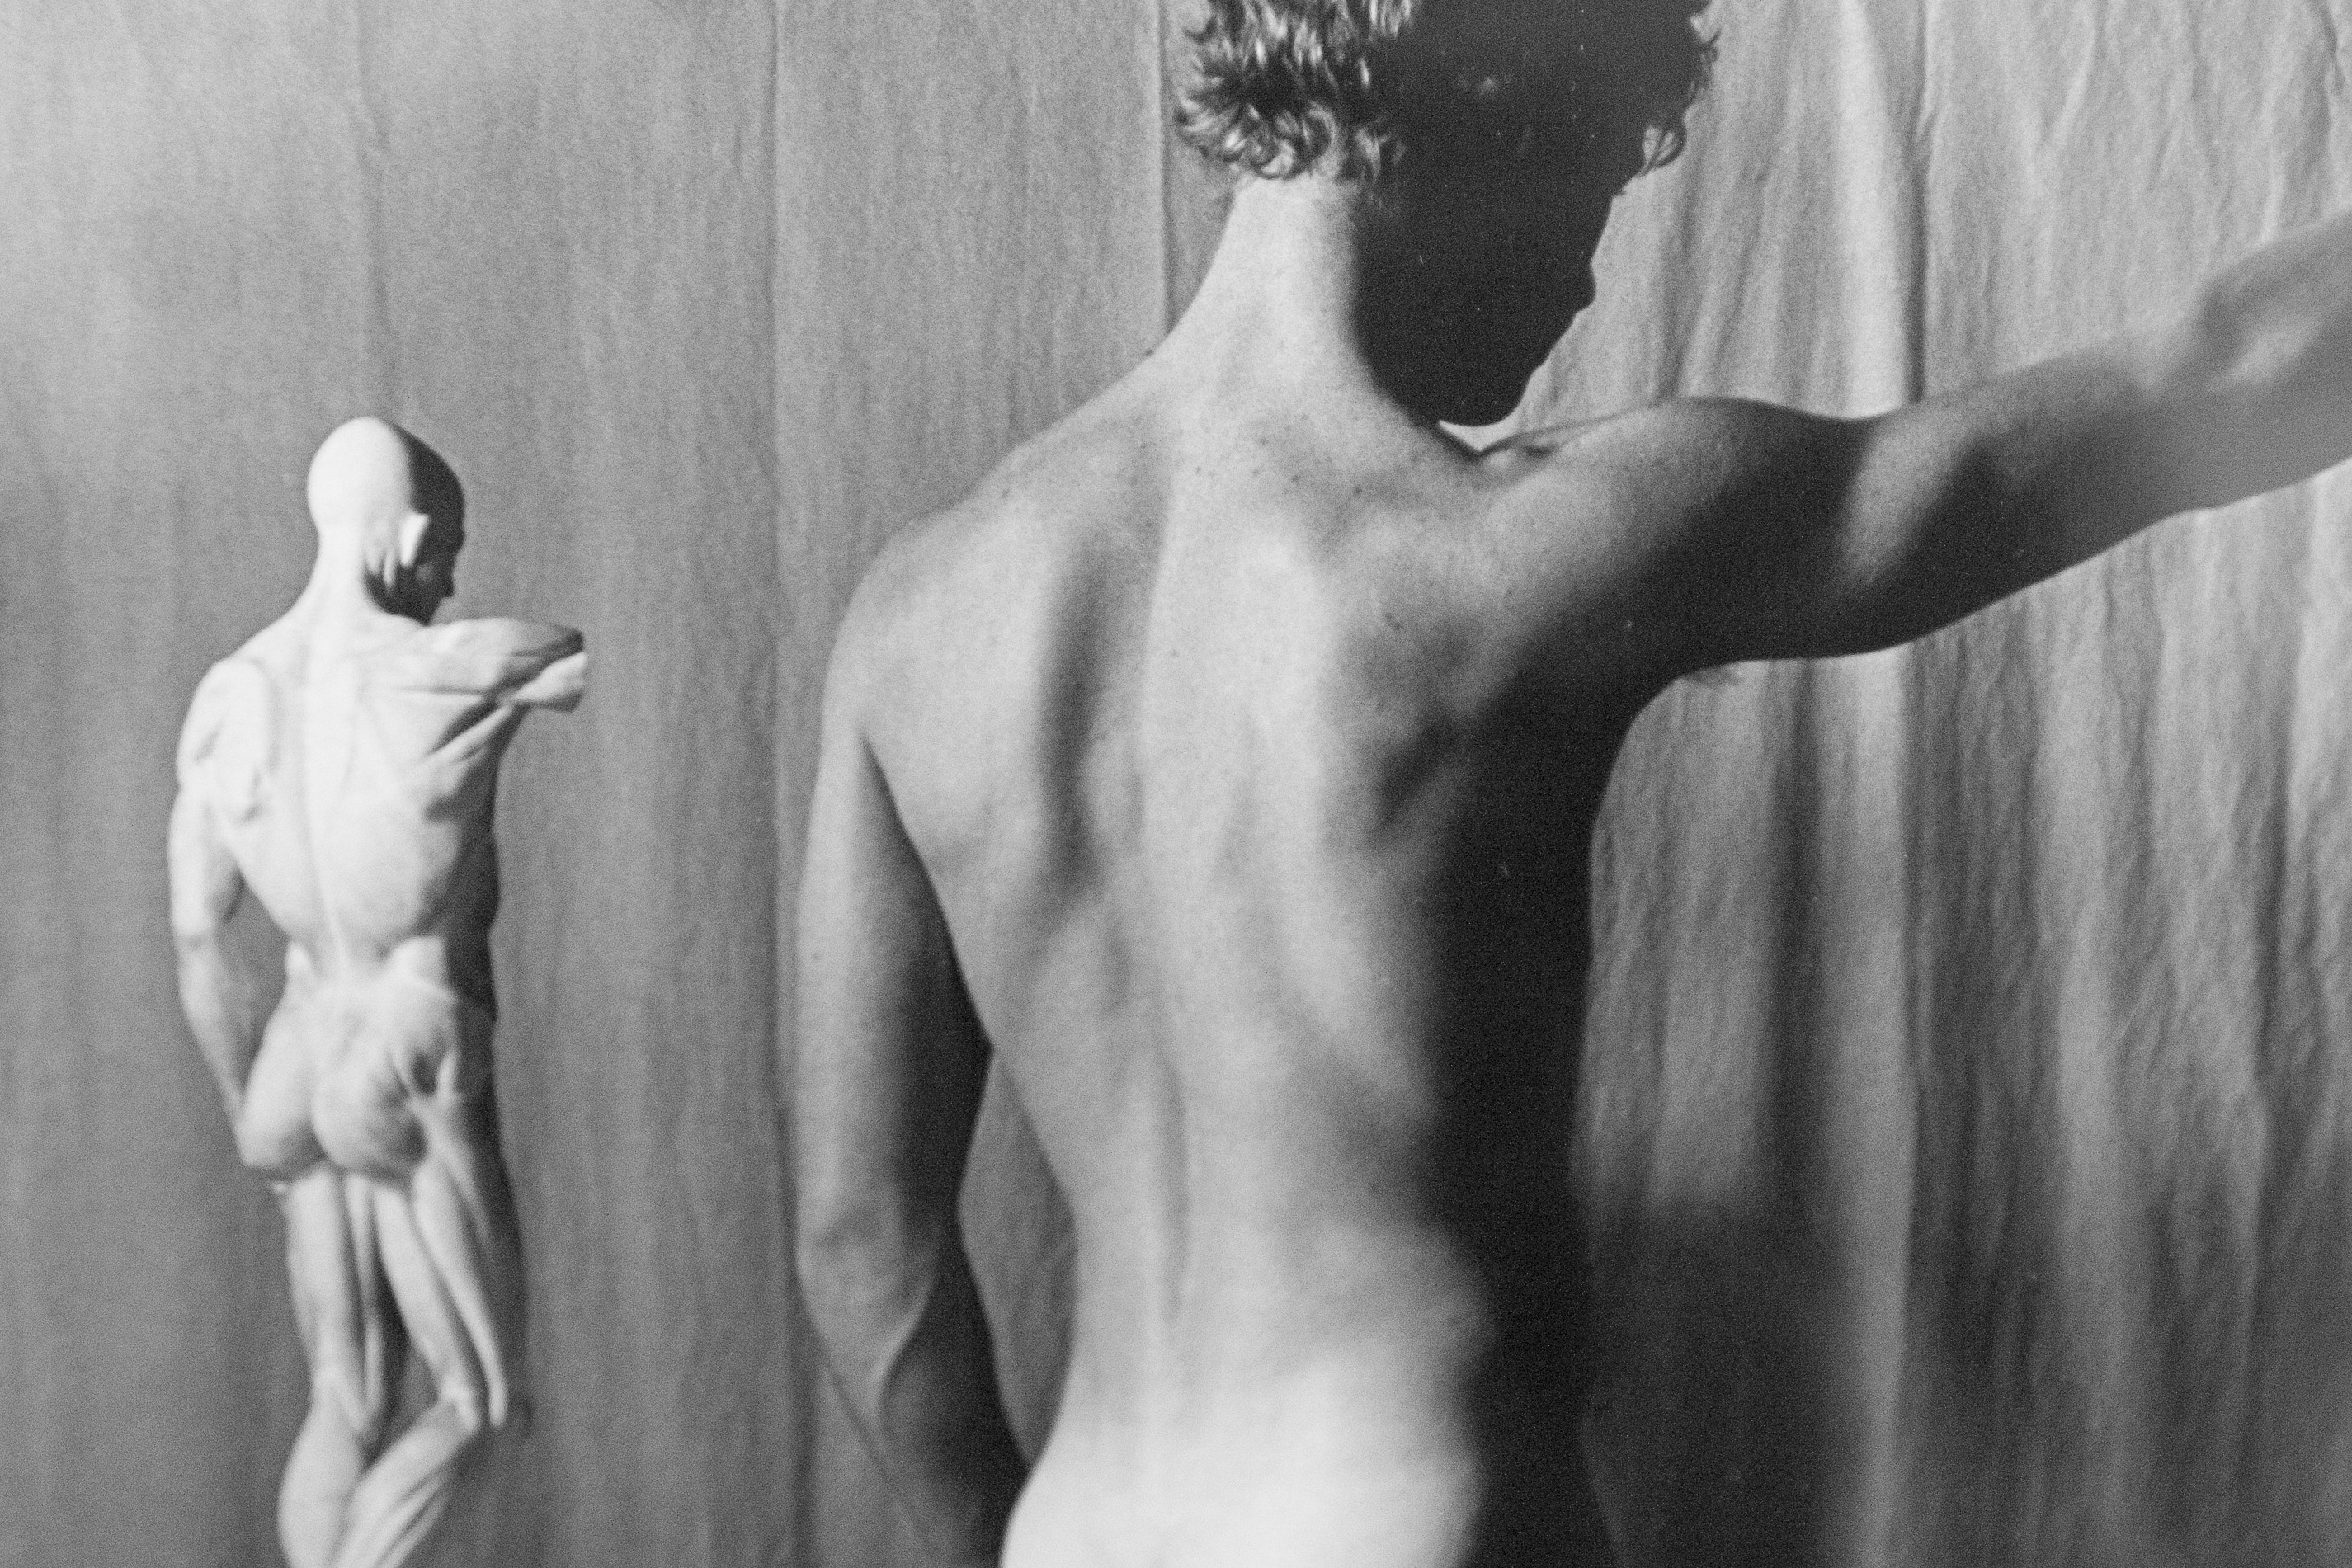 Male Nude with Houdon Ecorche II, no date, Roger L. Crossgrove, gelatin silver print, part of the 'Stark Imagery: The Male Nude in Art' exhibit at the Benton Museum. (Sean Flynn/UConn Photo)